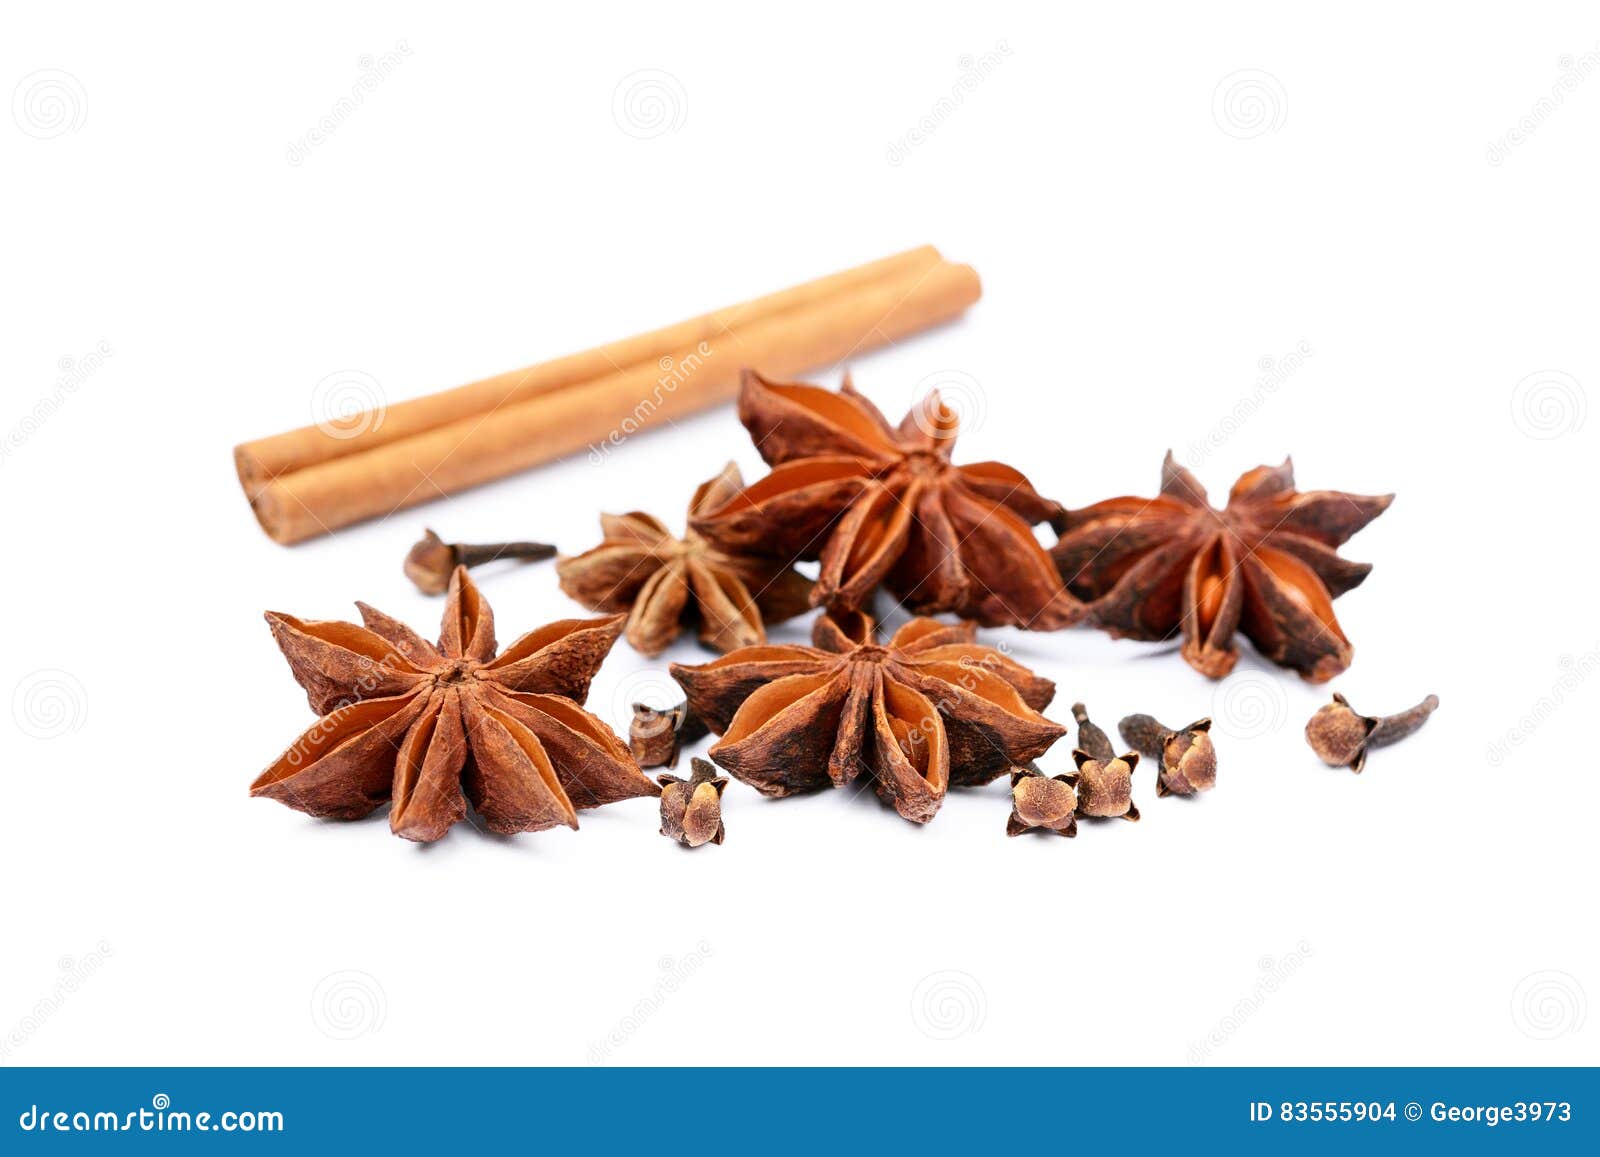 Star Anise, Cinnamon Sticks and Cloves Stock Image Image of cooking